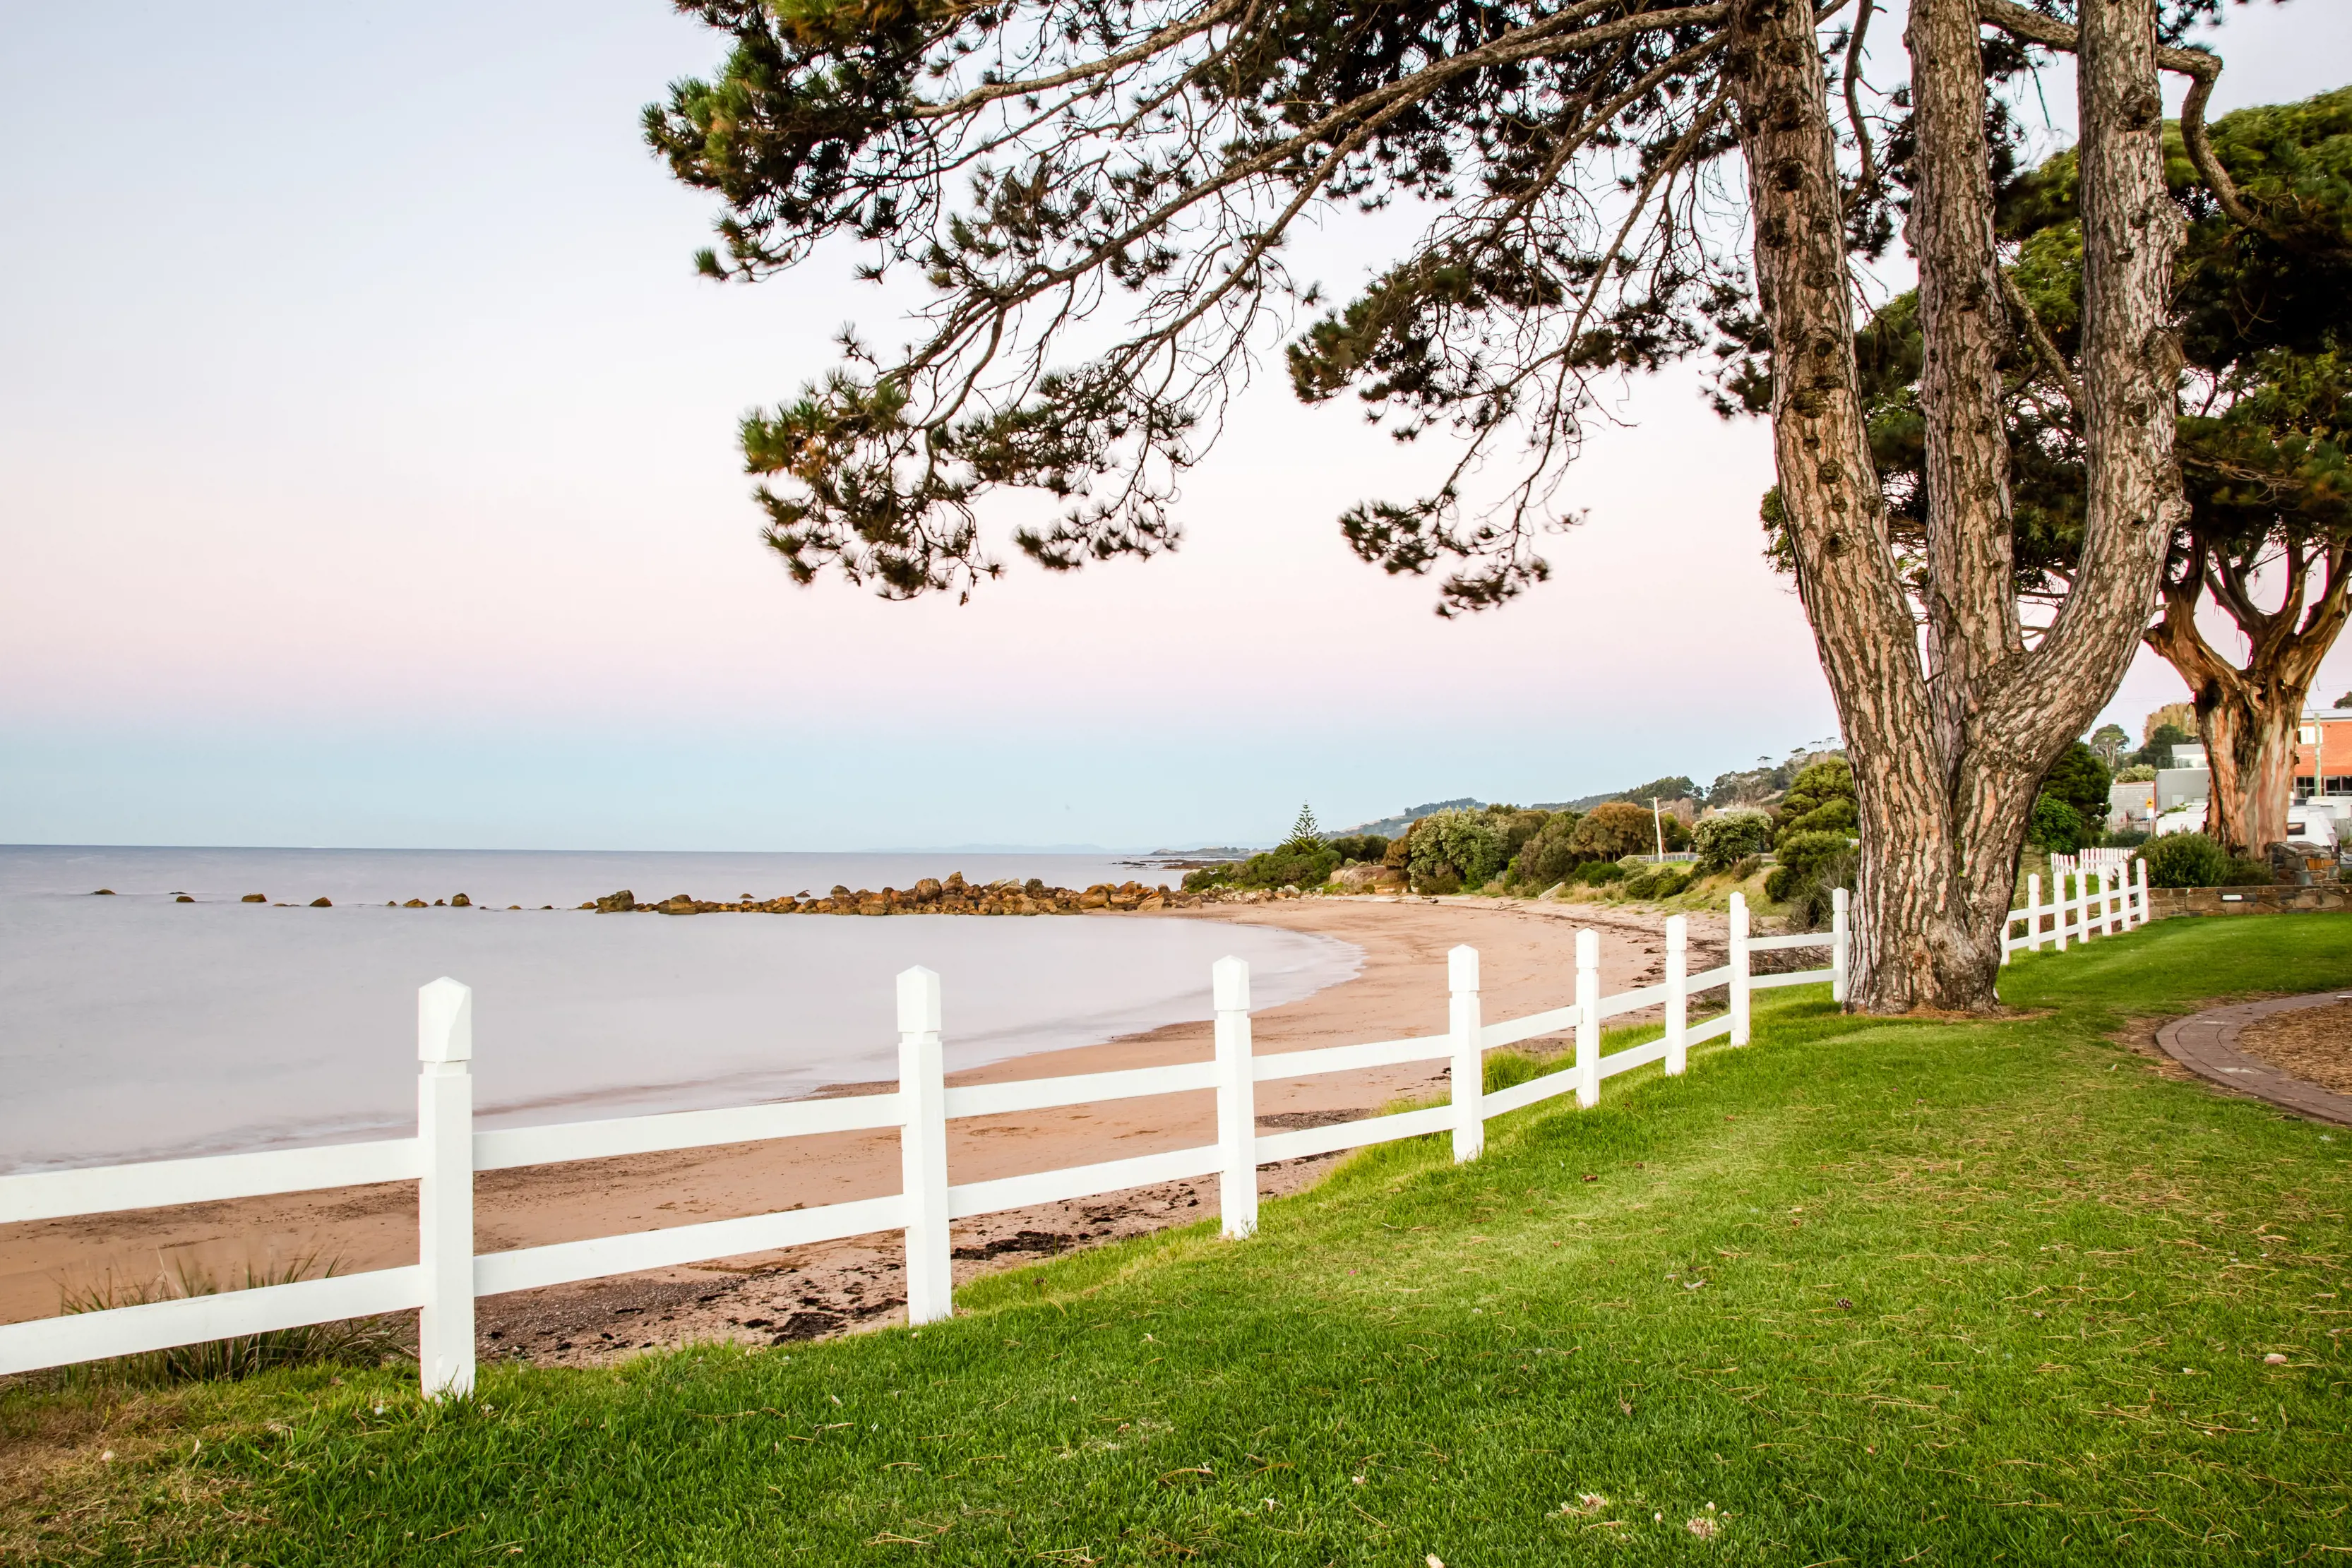 A beautiful image of Penguin foreshore, taken on dusk, displaying colourful pastel tones over the ocean.